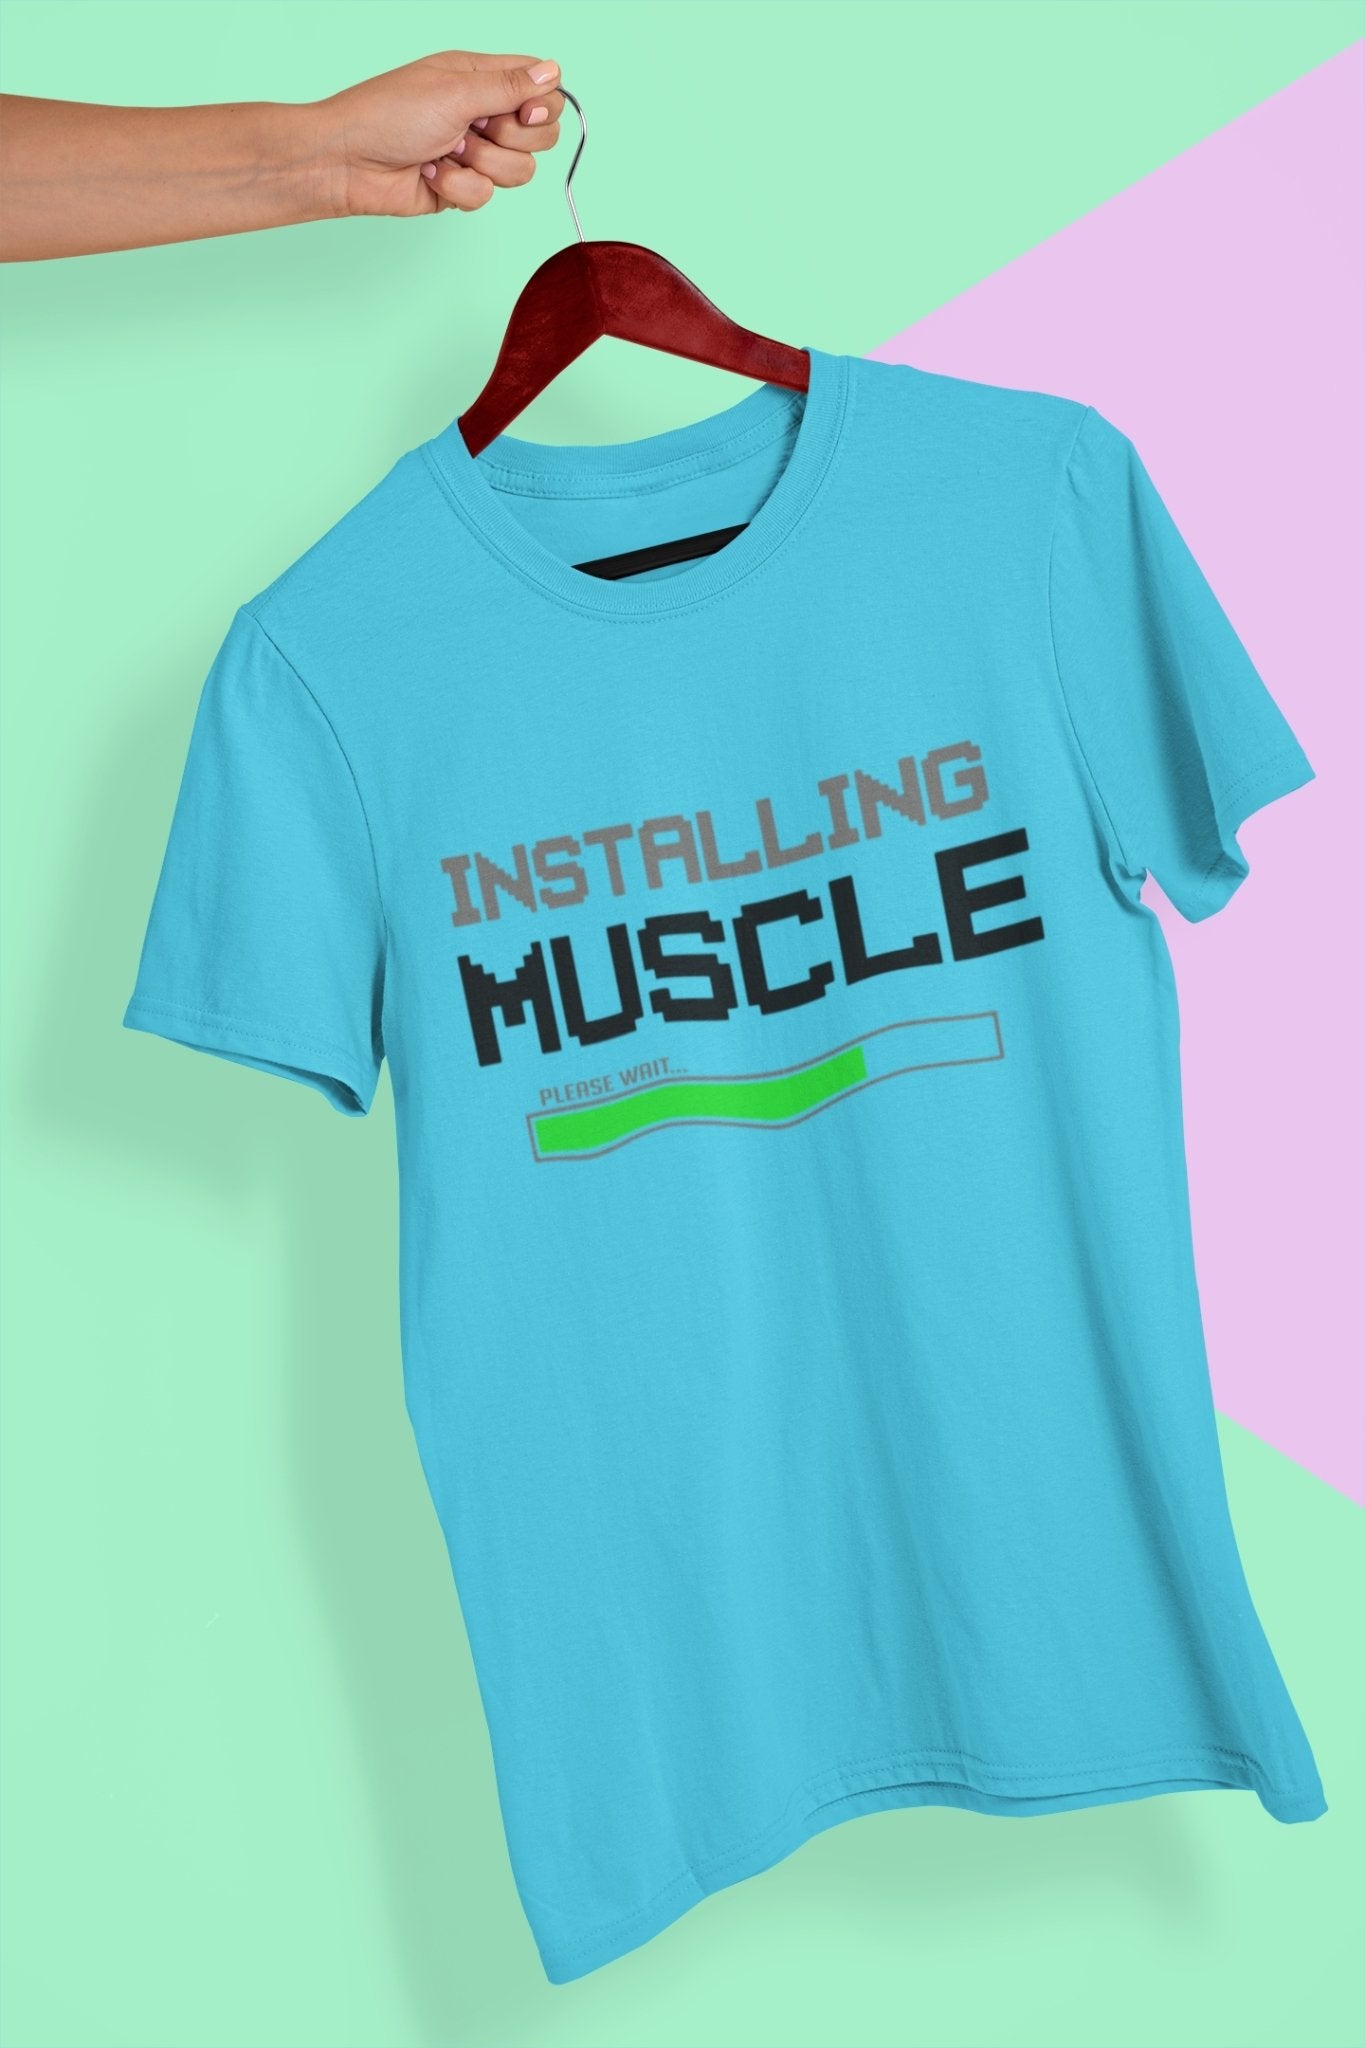 Installing Muscles Gym And Workout Women Half Sleeves T-shirt- FunkyTeesClub - Funky Tees Club